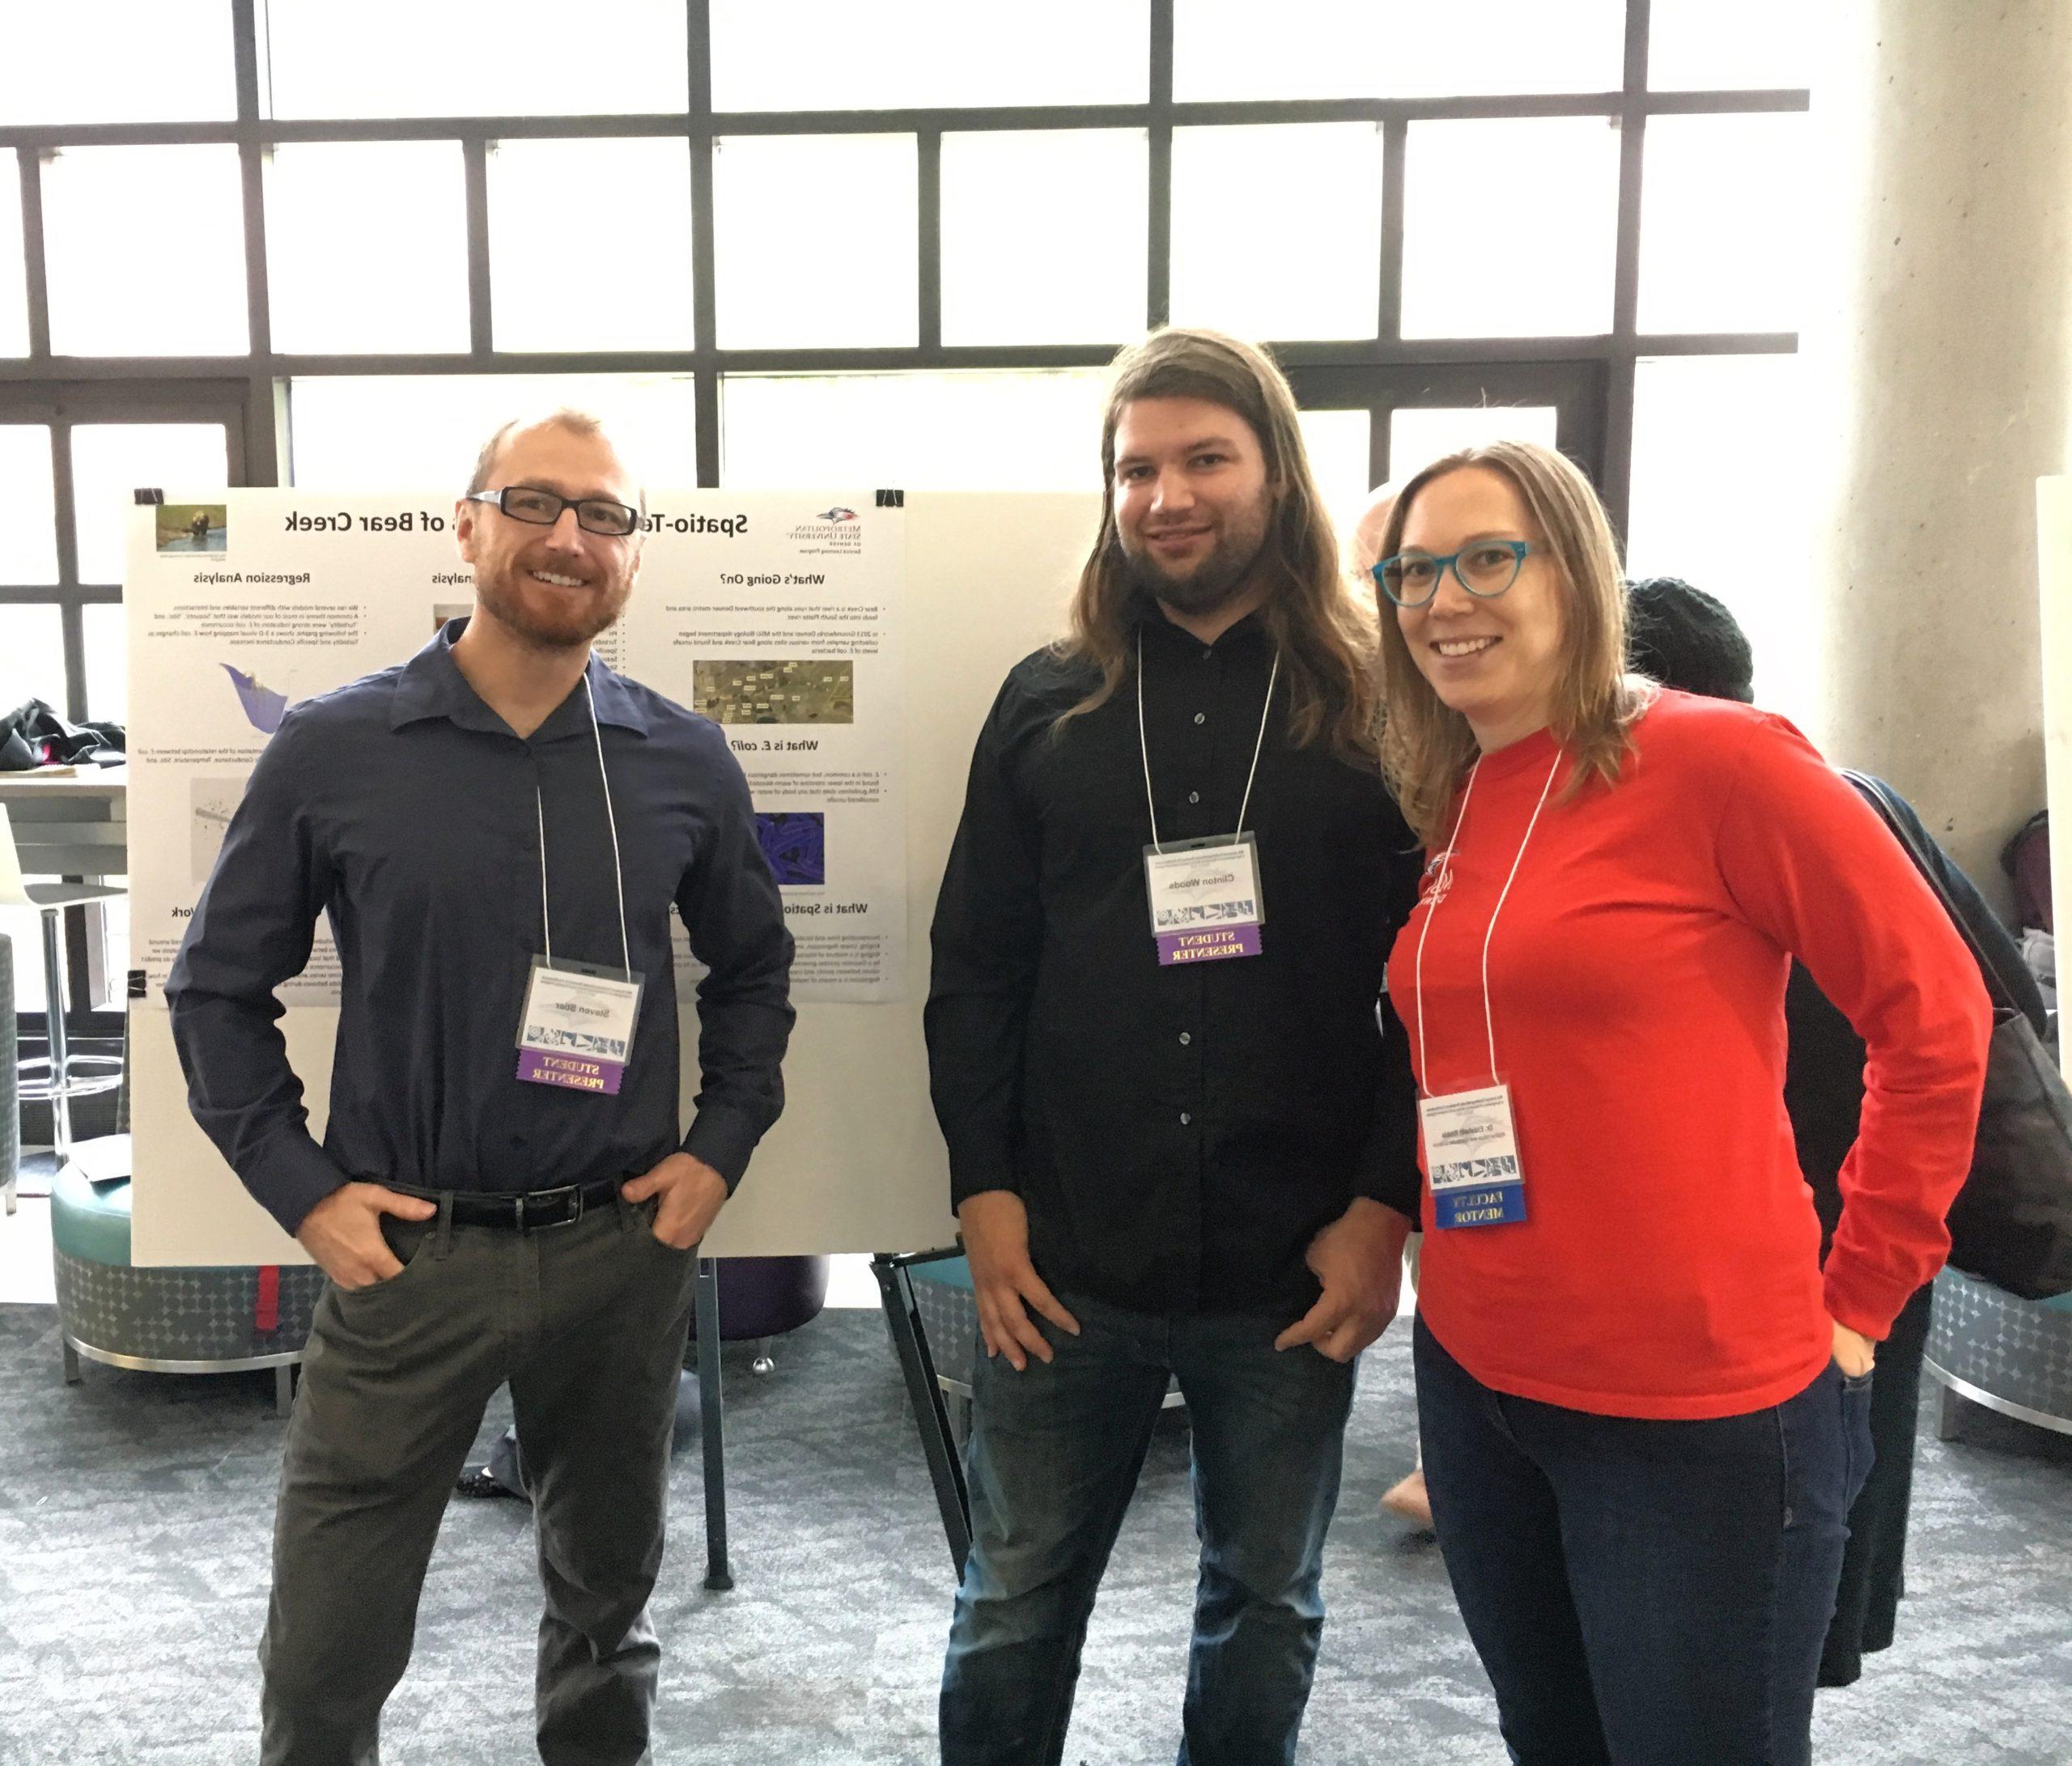 Two student presenters and a faculty mentor at a conference.